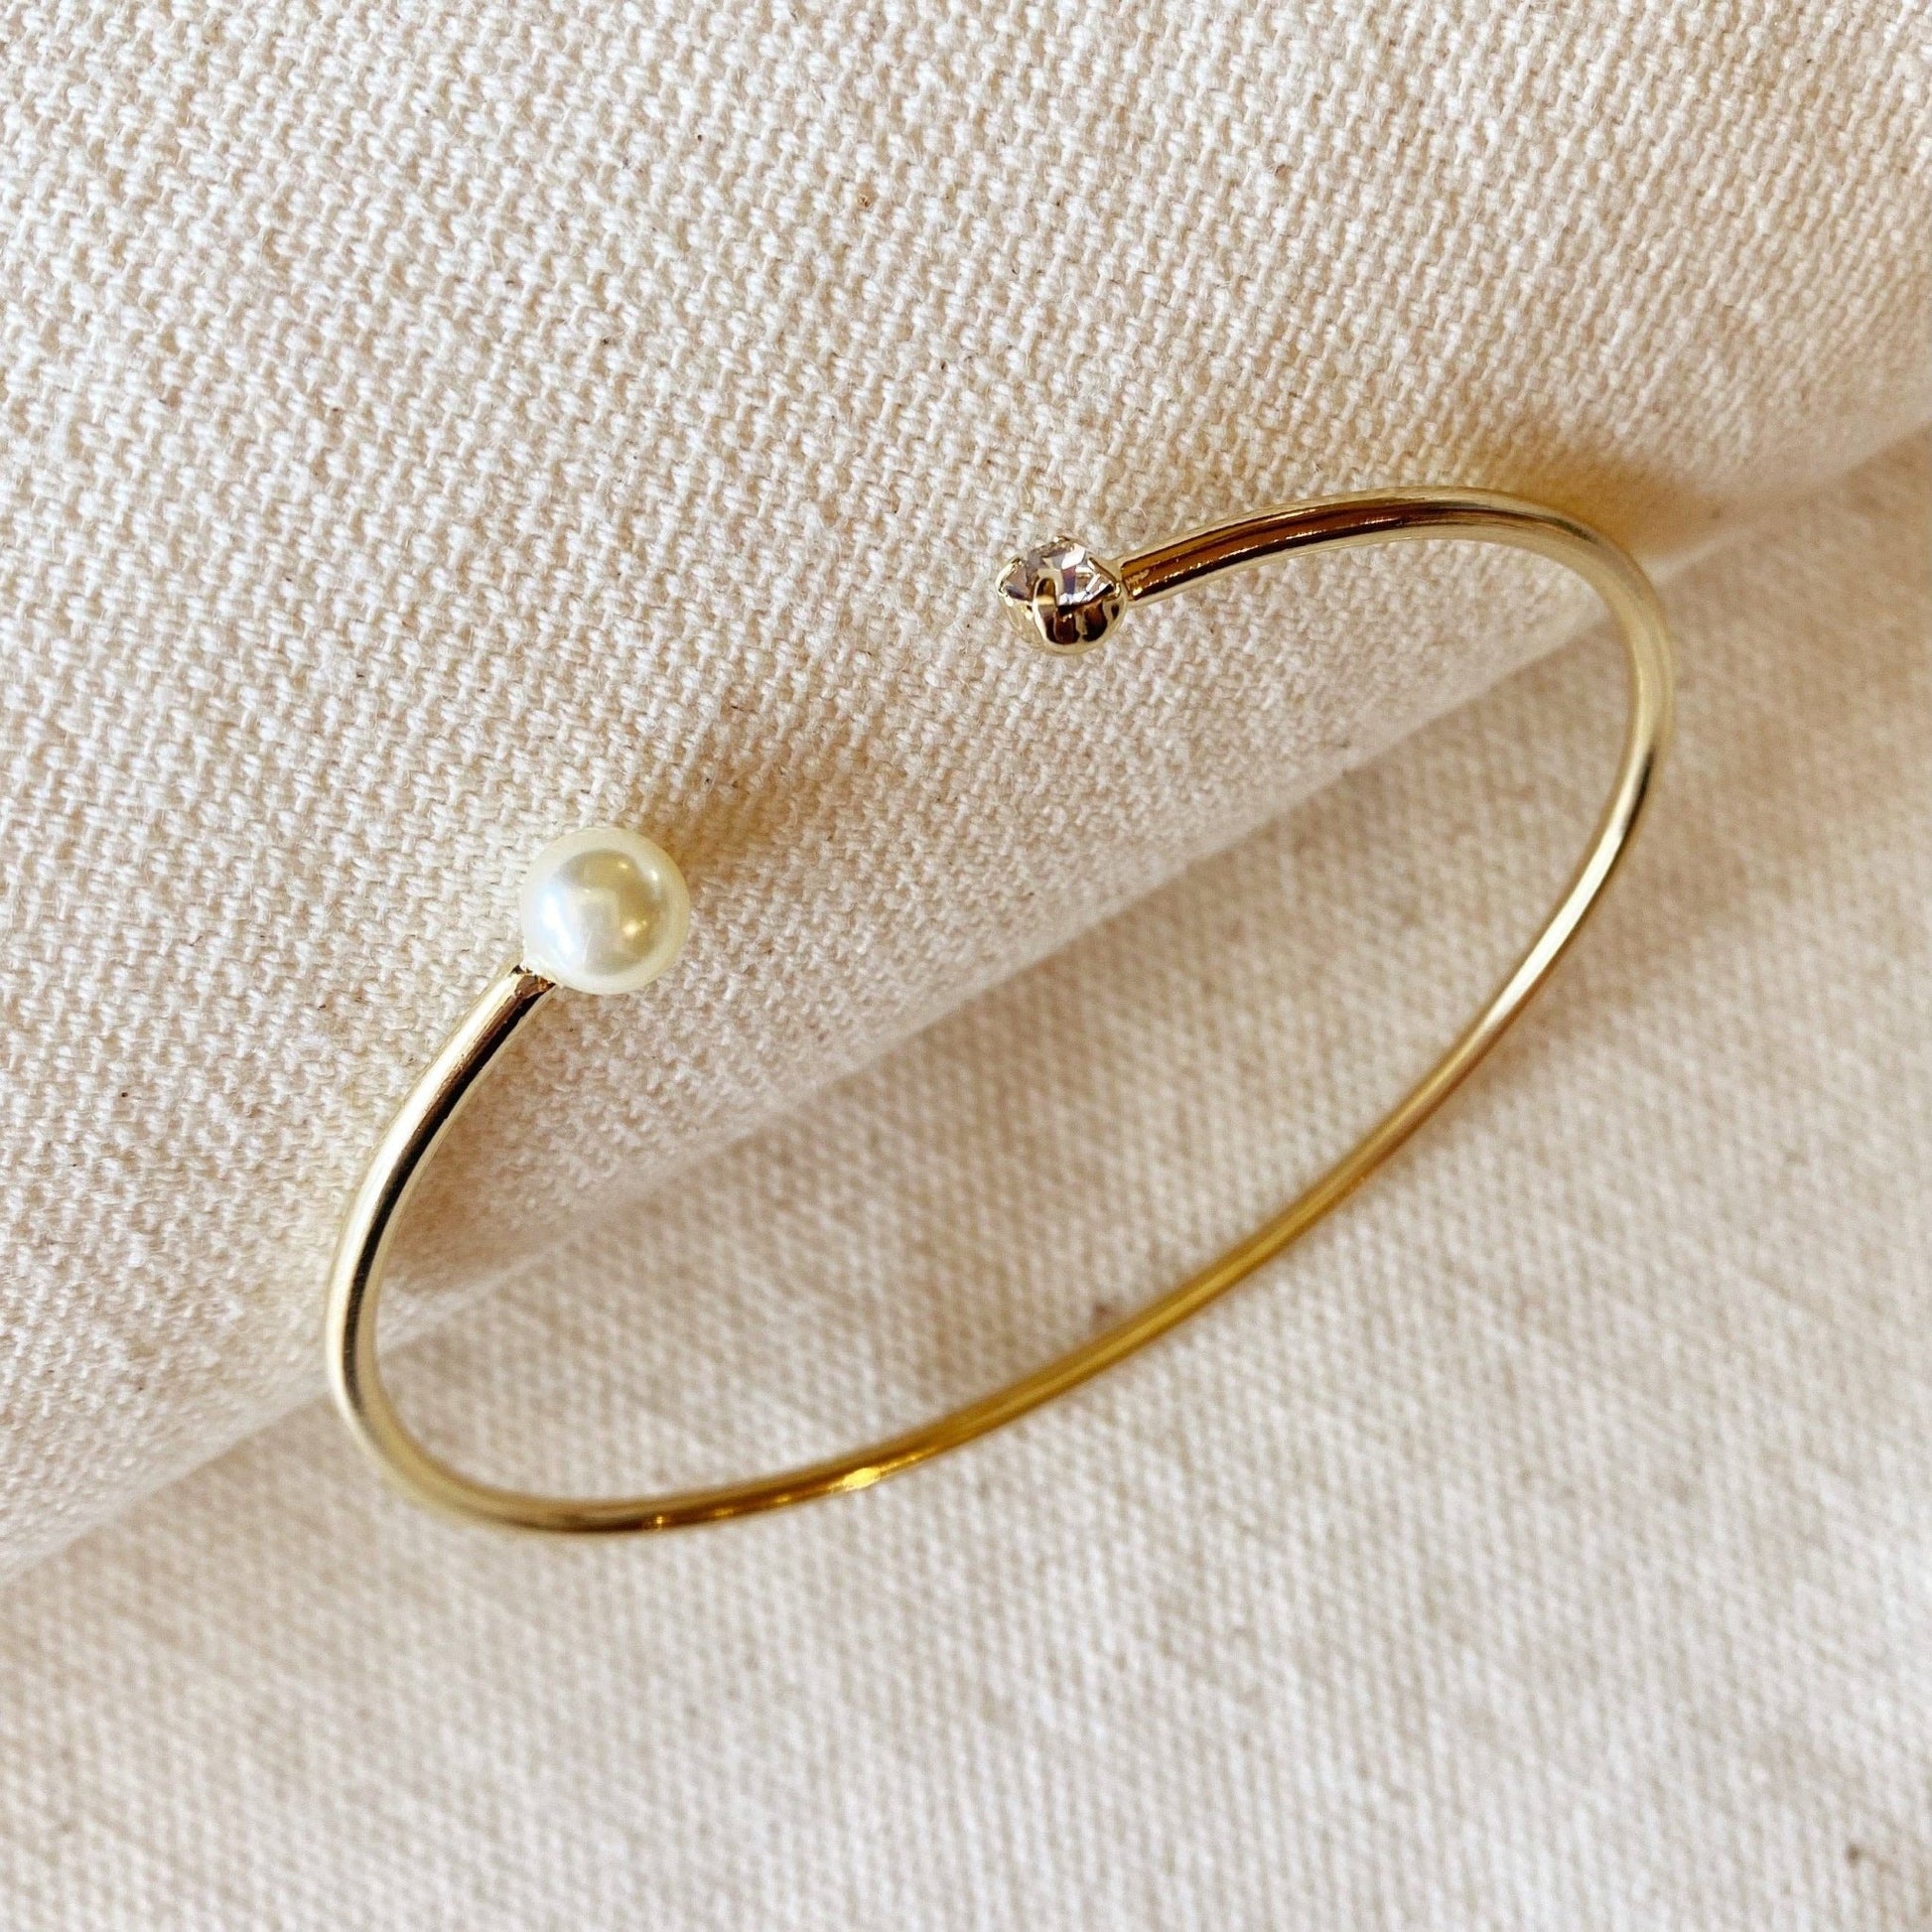 18k Gold Filled Pearl and Crystal Cuff Bracelet - FOREVERLINKX